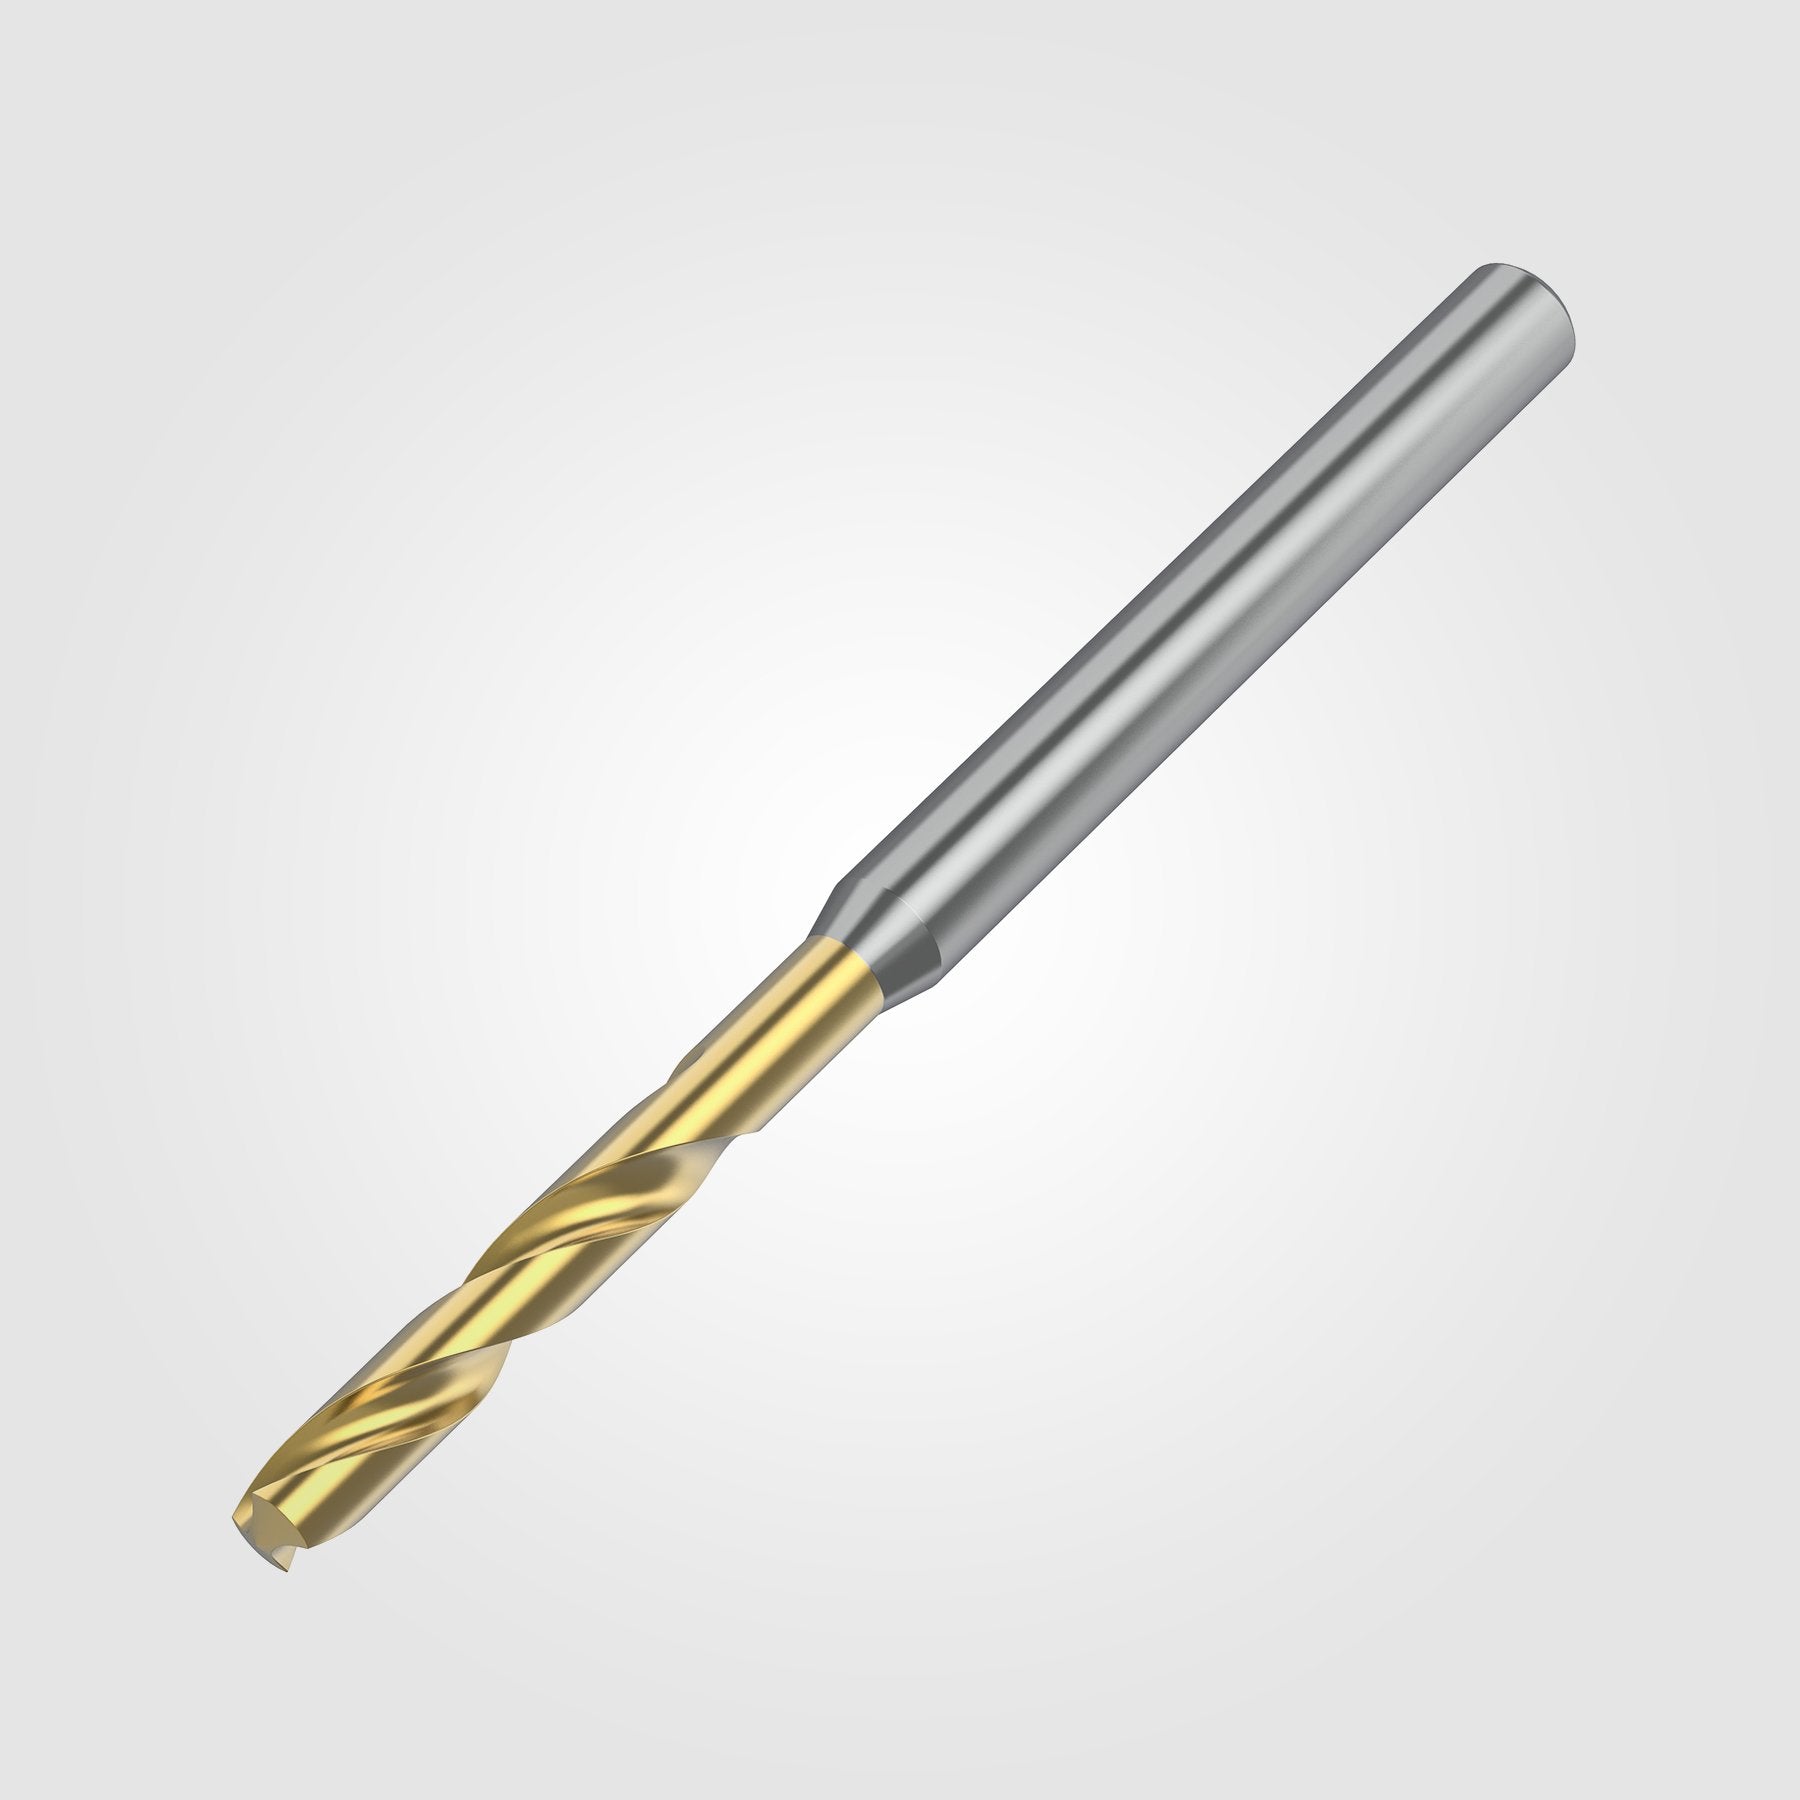 GOdrill (THROUGH COOLANT) | 5.5mm / .2165" / 5xD | SOLID CARBIDE DRILL | 4149218